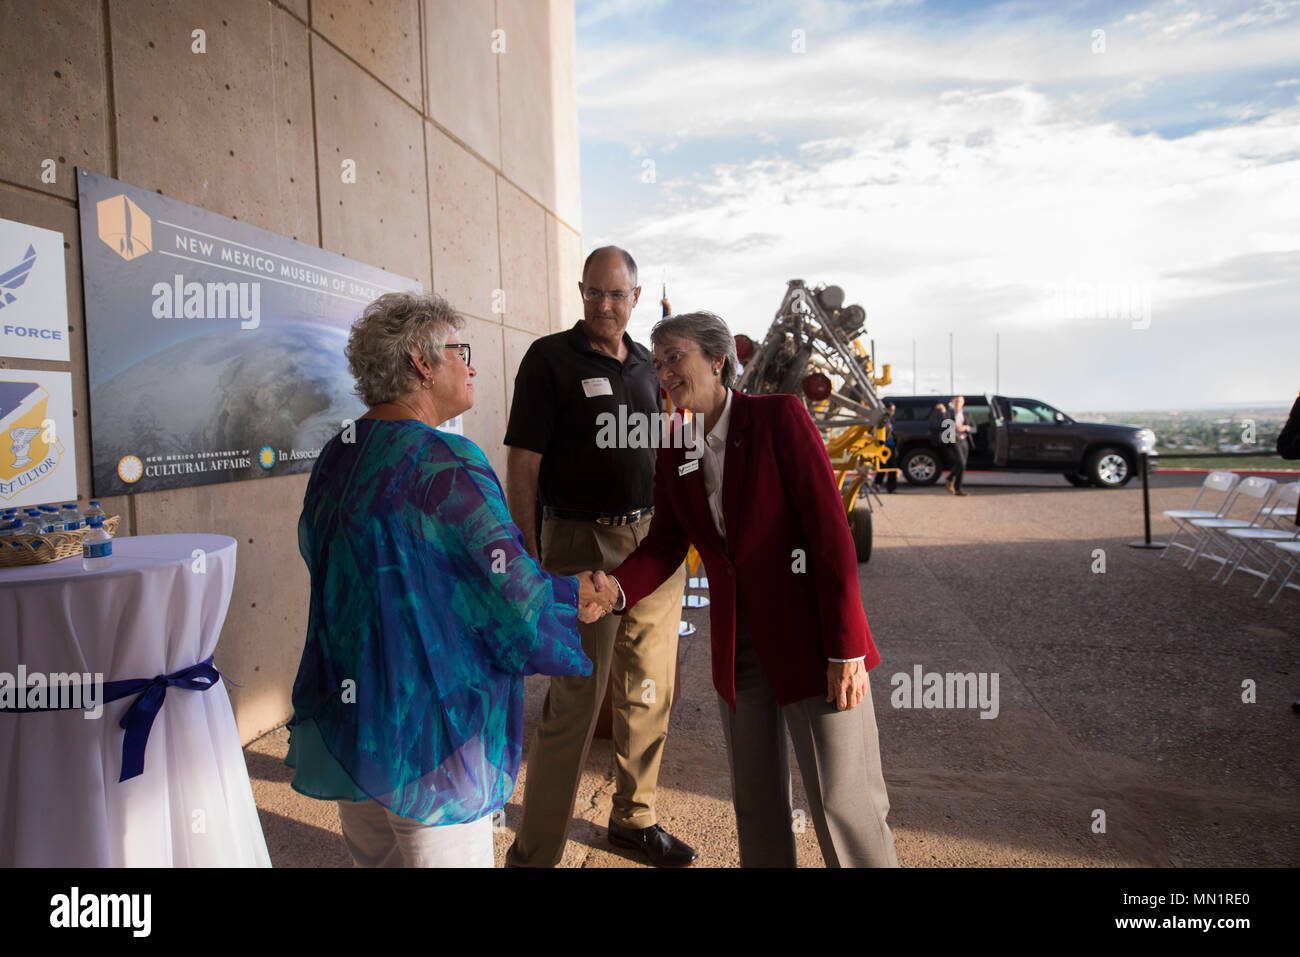 Secretary of the Air Force Heather Wilson is greeted by members of MainGate United, at the New Mexico Museum of Space history in Alamogordo, N.M., Aug. 8, 2017. Wilson came to Holloman Air Force Base and is here for a live-fly experiment with off-the-shelf aircraft. The Air Force is pursuing a Light Attack Capabilities Experimentation Campaign, which has grown out of our Close Air Support Experimentation Campaign. The Campaign is being led by the Air Force Strategic Development Planning and Experimentation Office under Air Force Materiel Command. (U.S. Air Force photo by Tech. Sgt. Amanda Junk Stock Photo